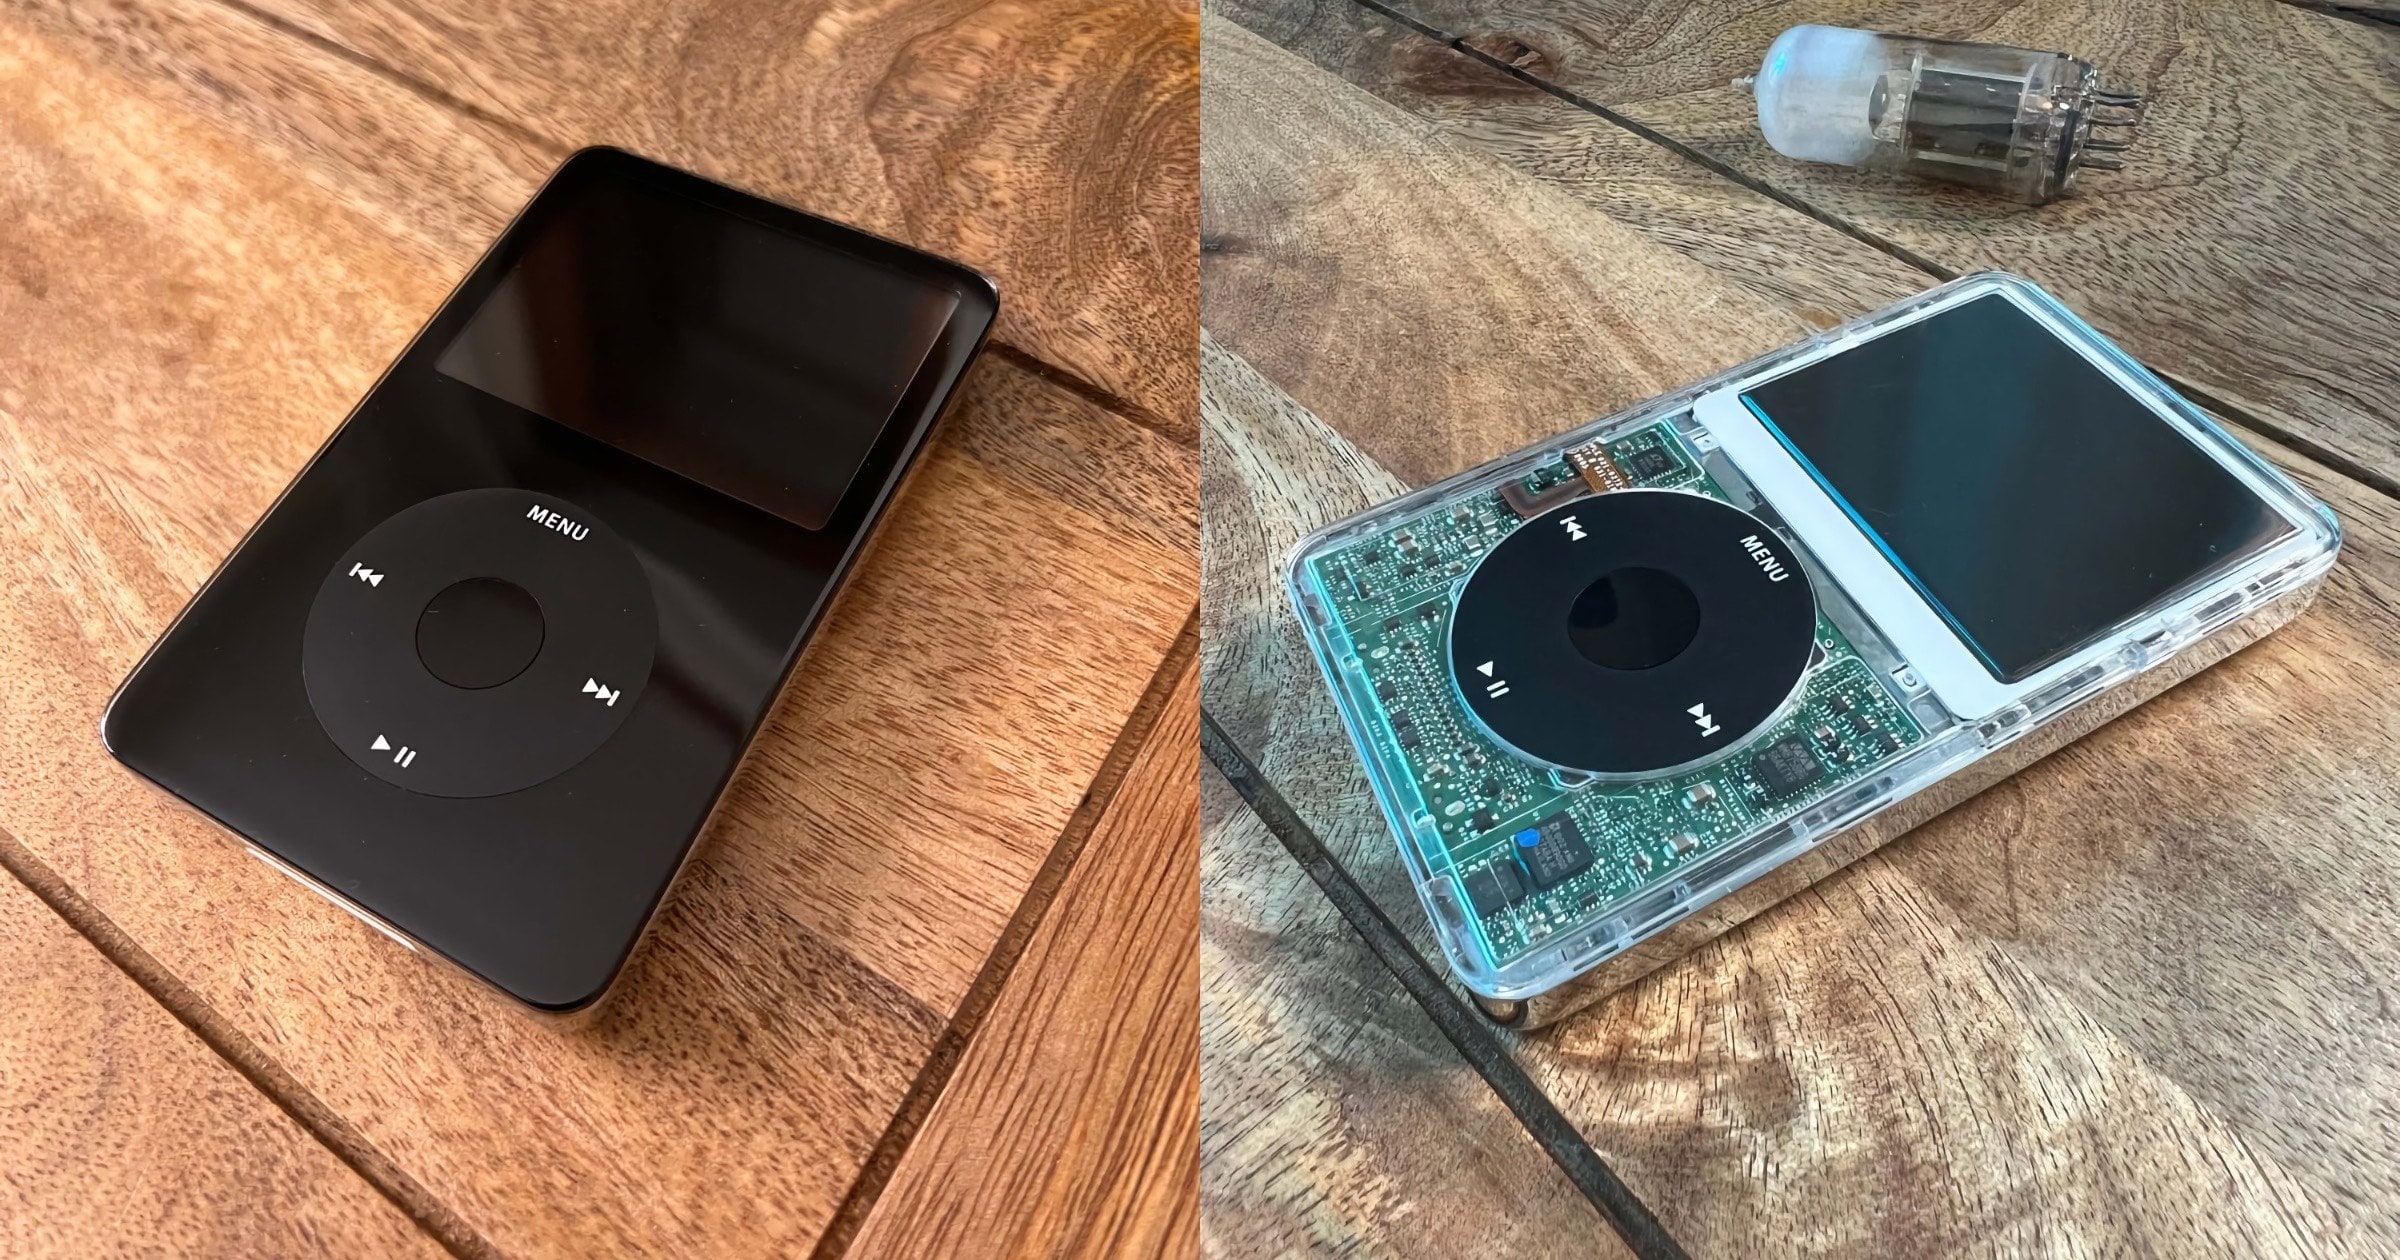 This Engineer Upgraded her iPod Video to Modernize it for 2022